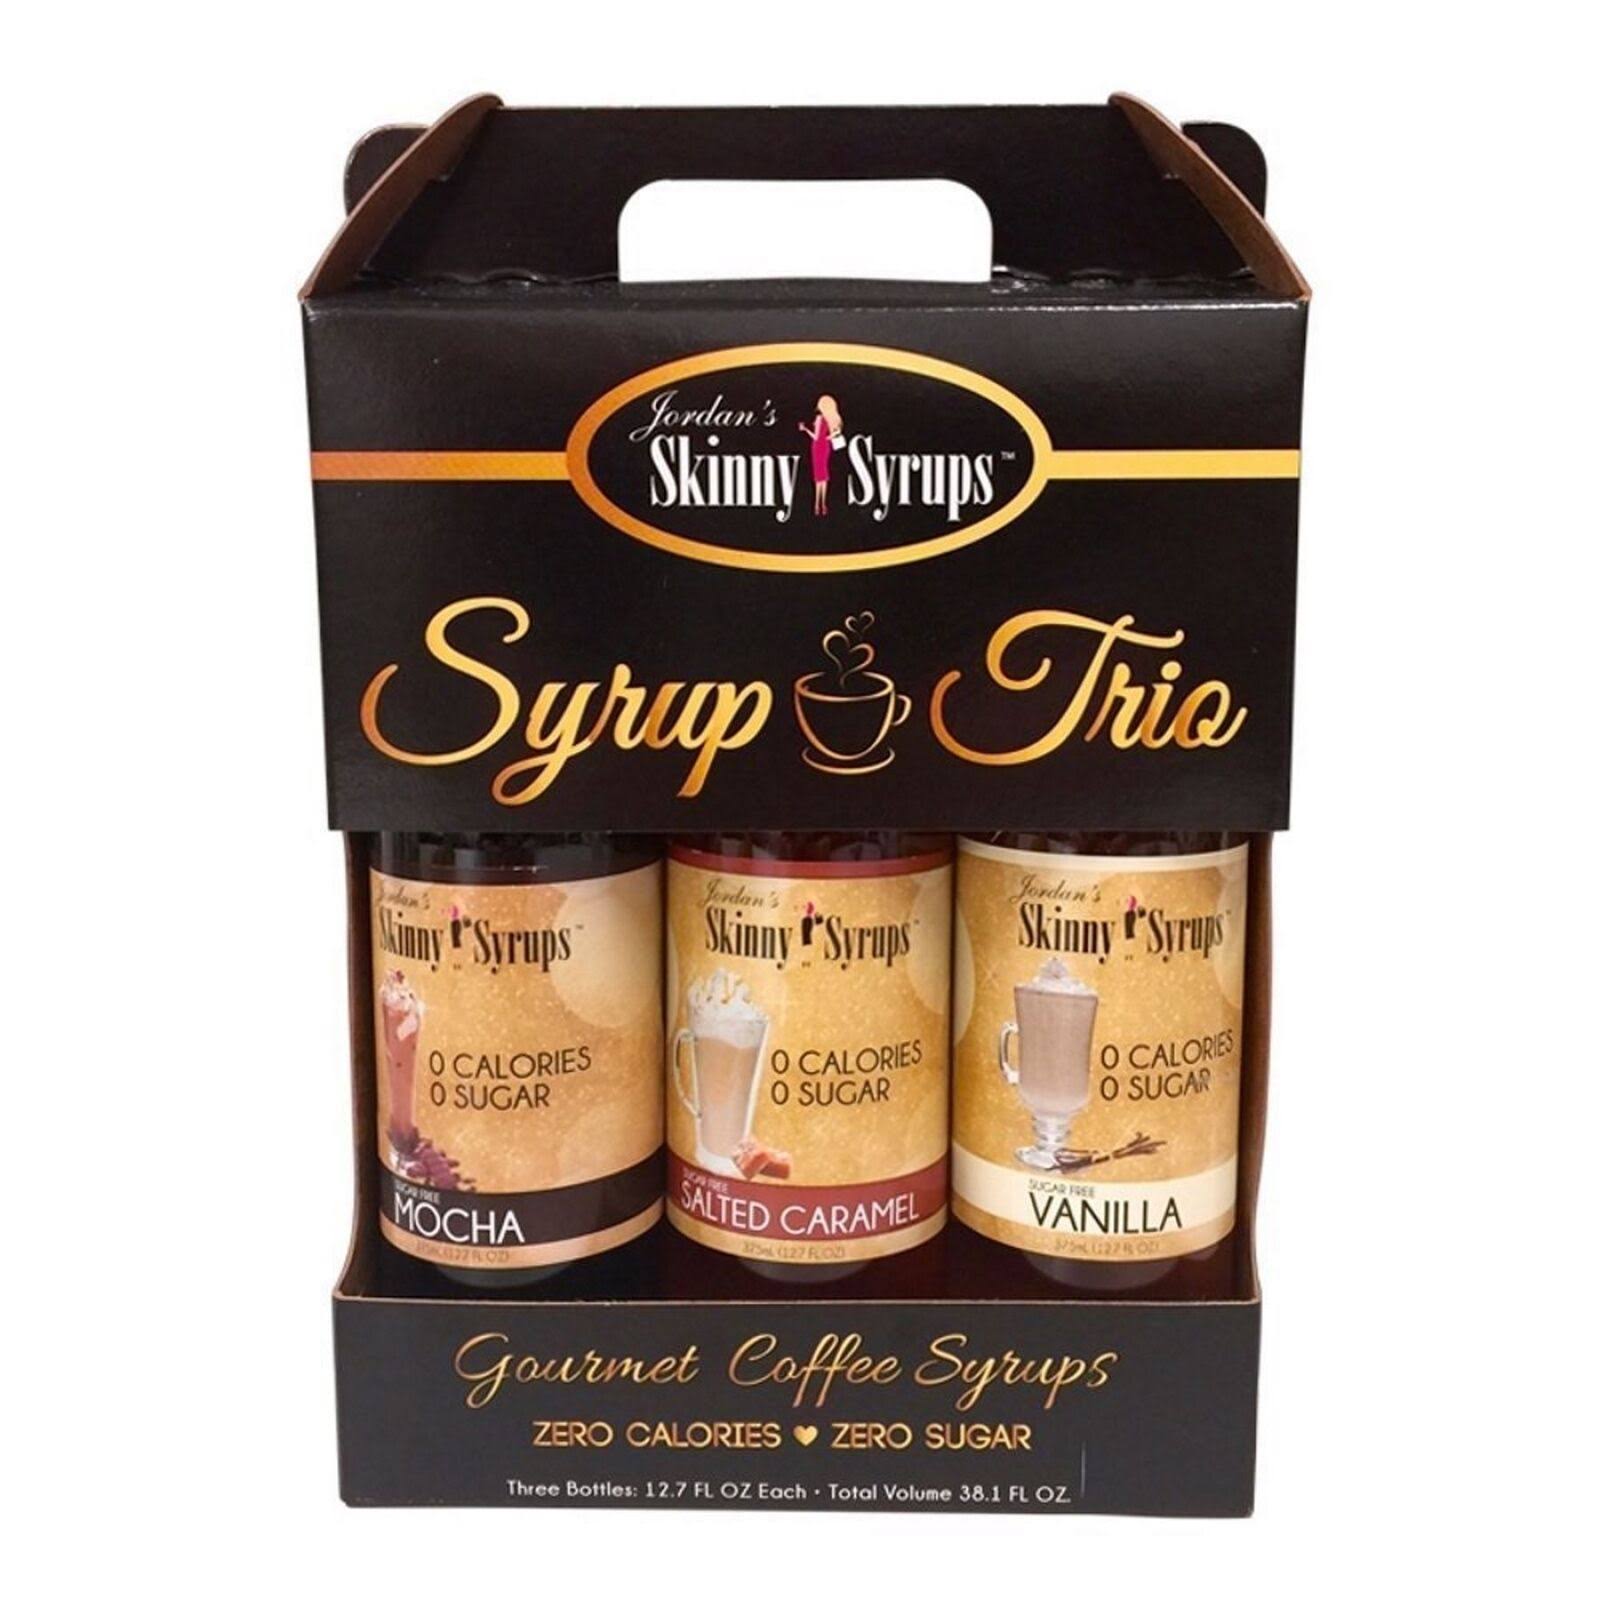 Skinny Syrups Classic Syrup Trio - Vanilla, Mocha and Salted Caramel, Pack of 3